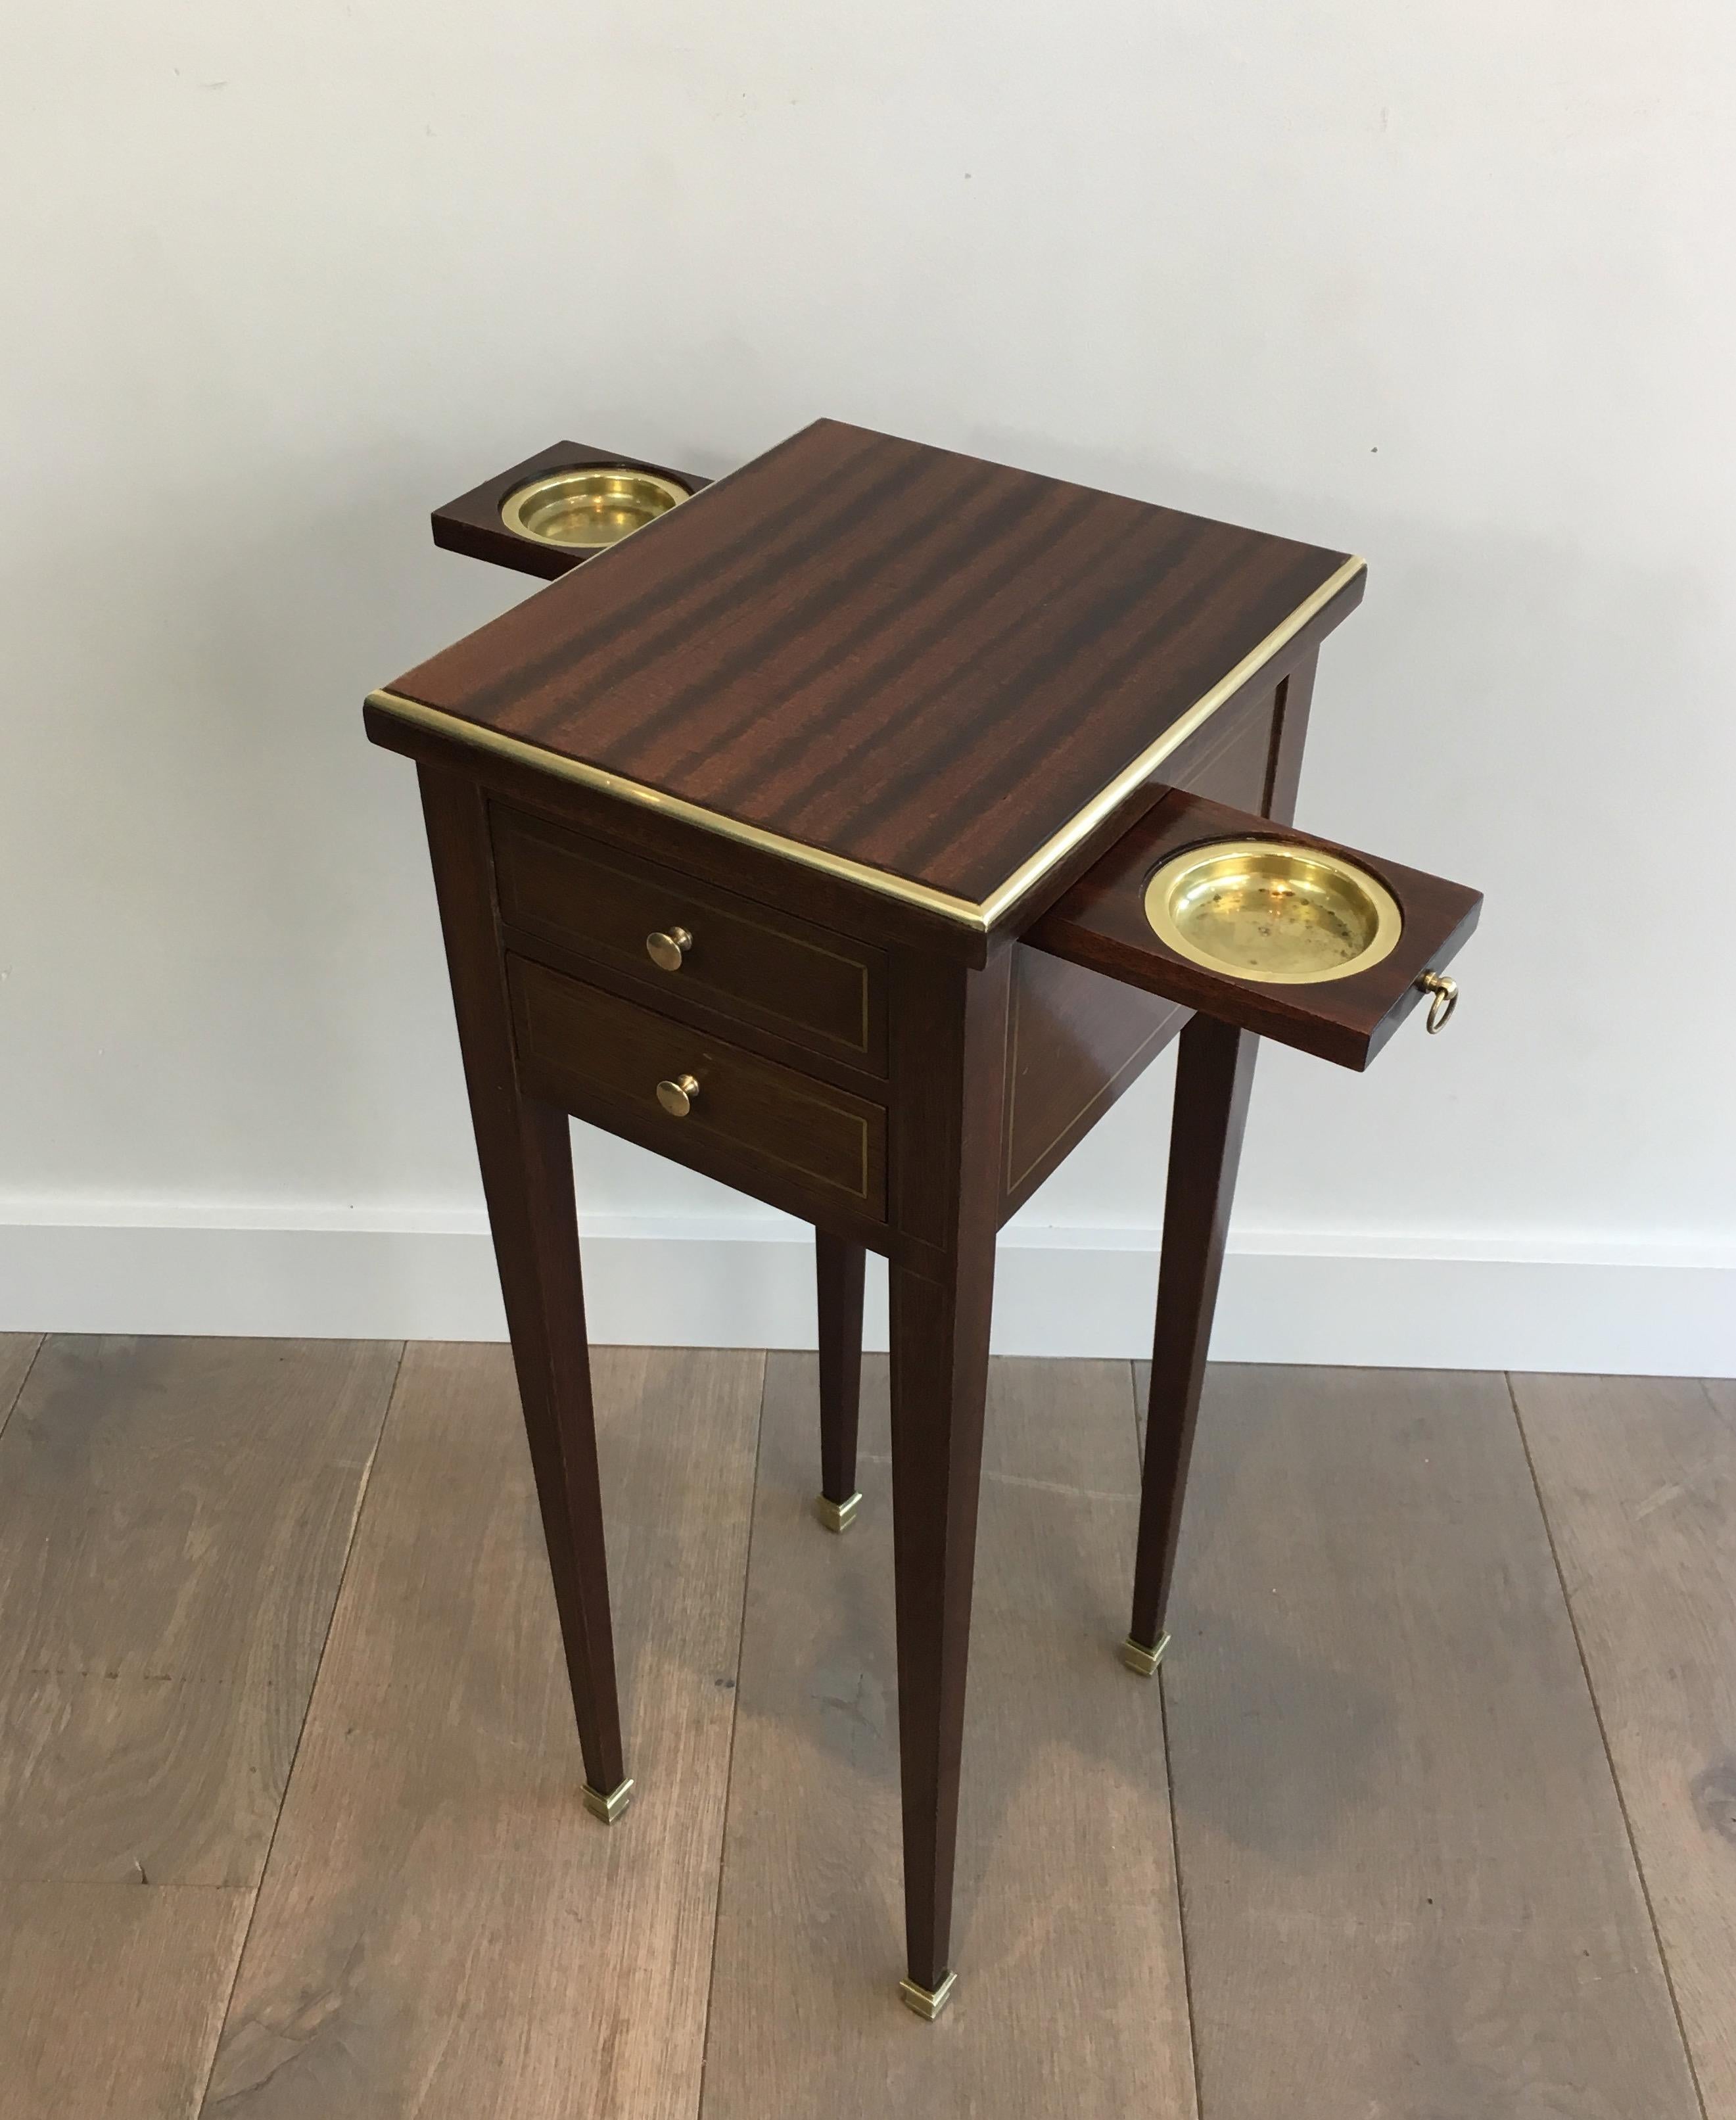 Unusual Neoclassical Small Drawers Table with Sliding Ashtrays 6